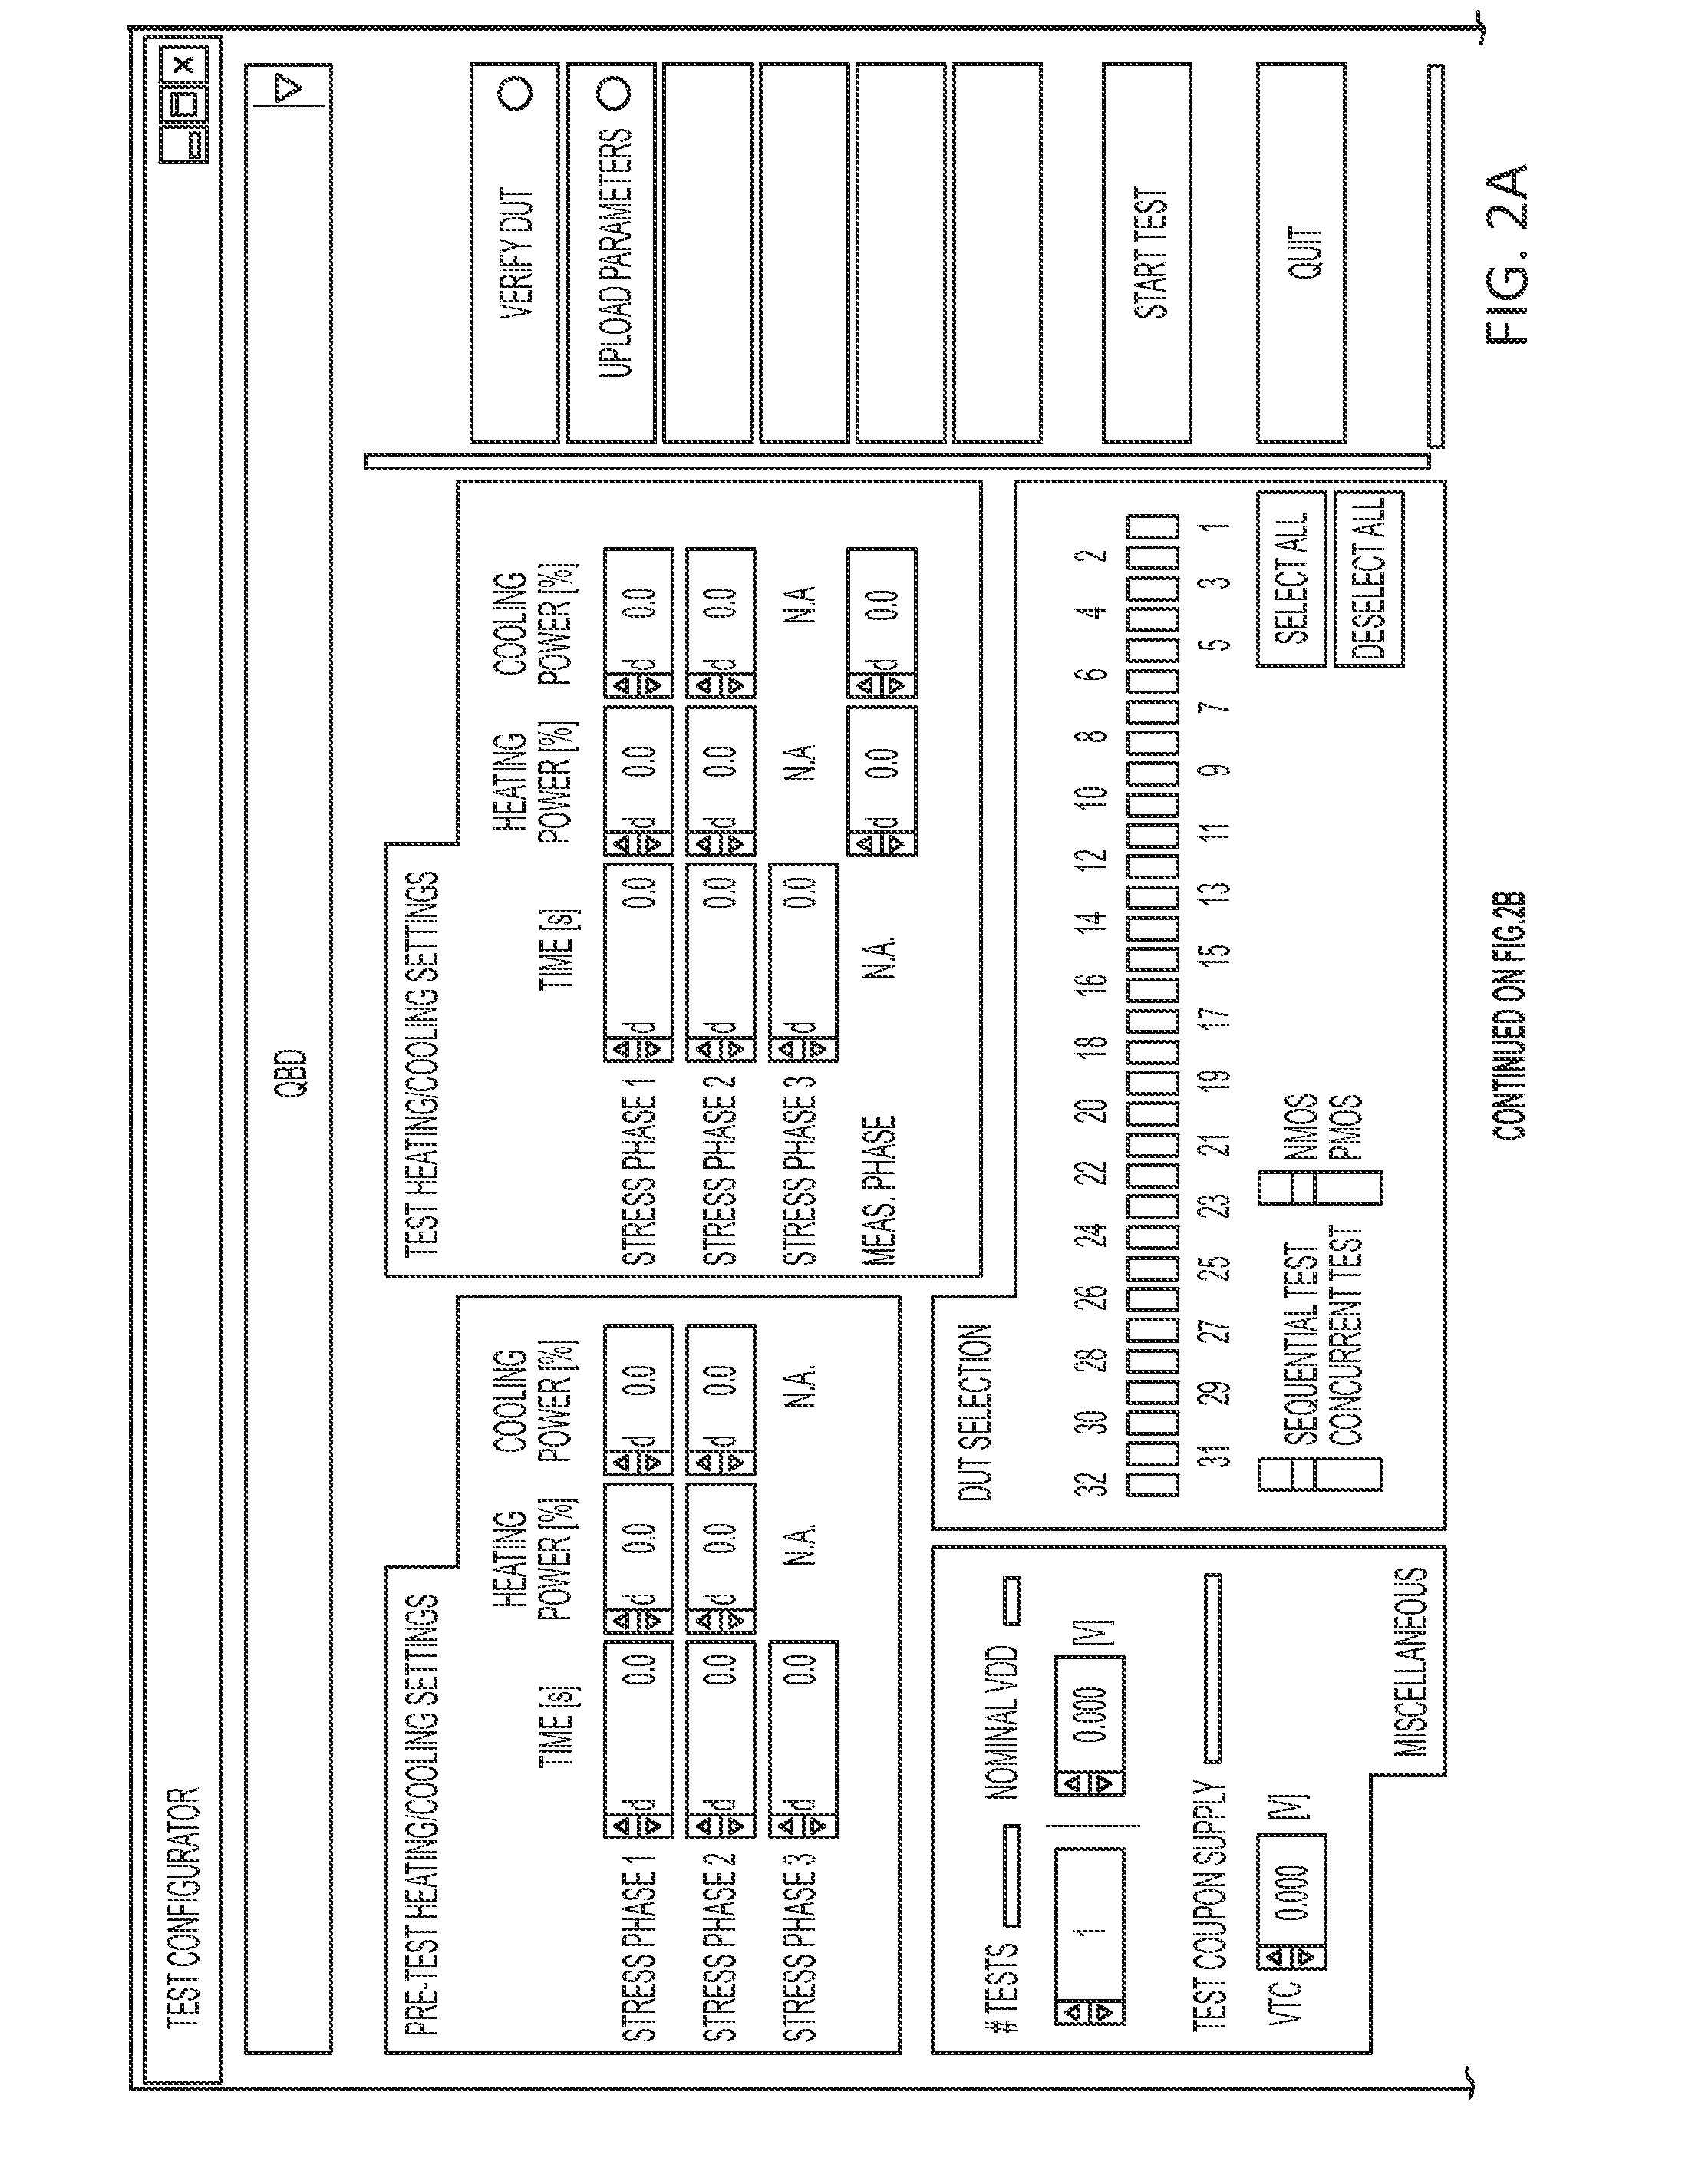 Programmable test chip, system and method for characterization of integrated circuit fabrication processes